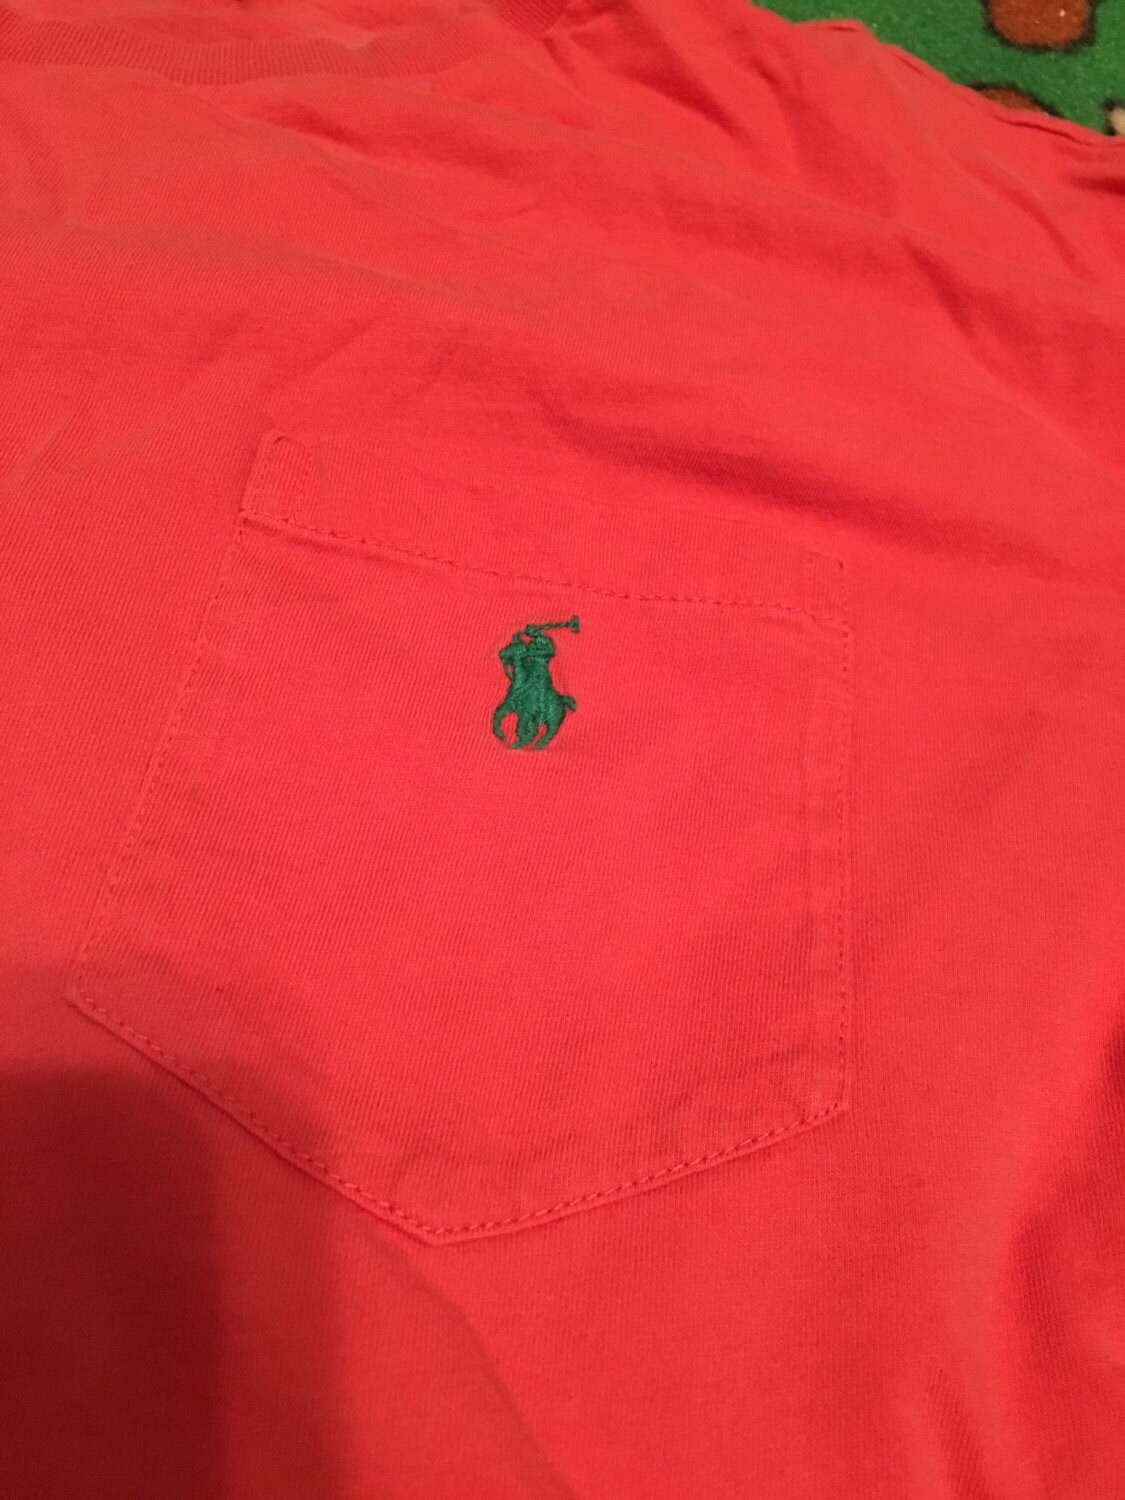 90s Polo by Ralph Lauren vintage pocket tee logo pink rare | Etsy